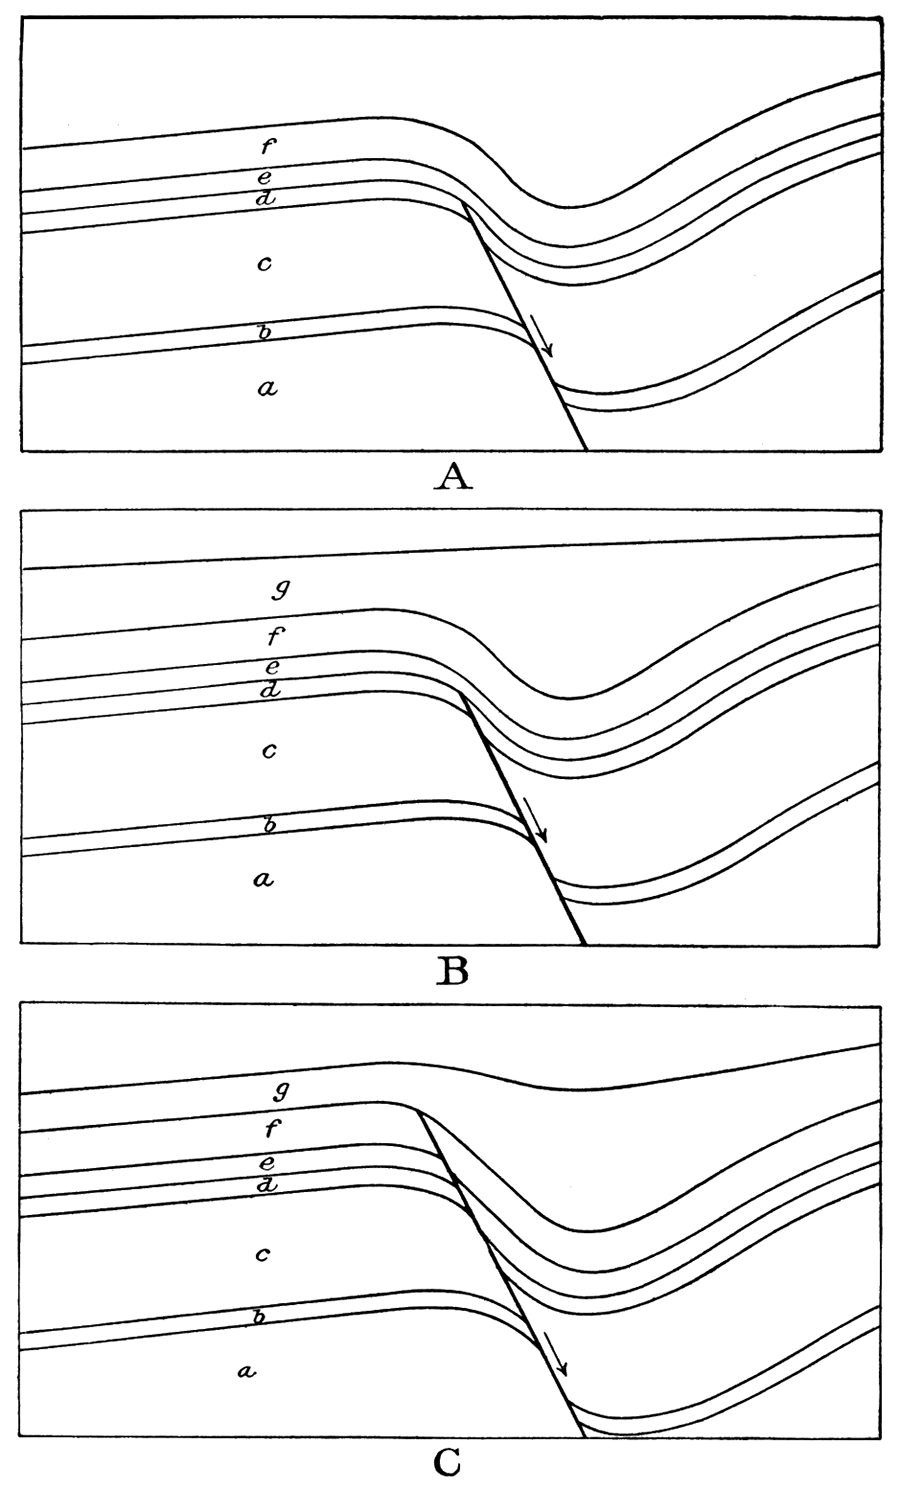 Diagrammatic sketches illustrating different stages in the upward dissipation of normal faults and their resolution into folding.